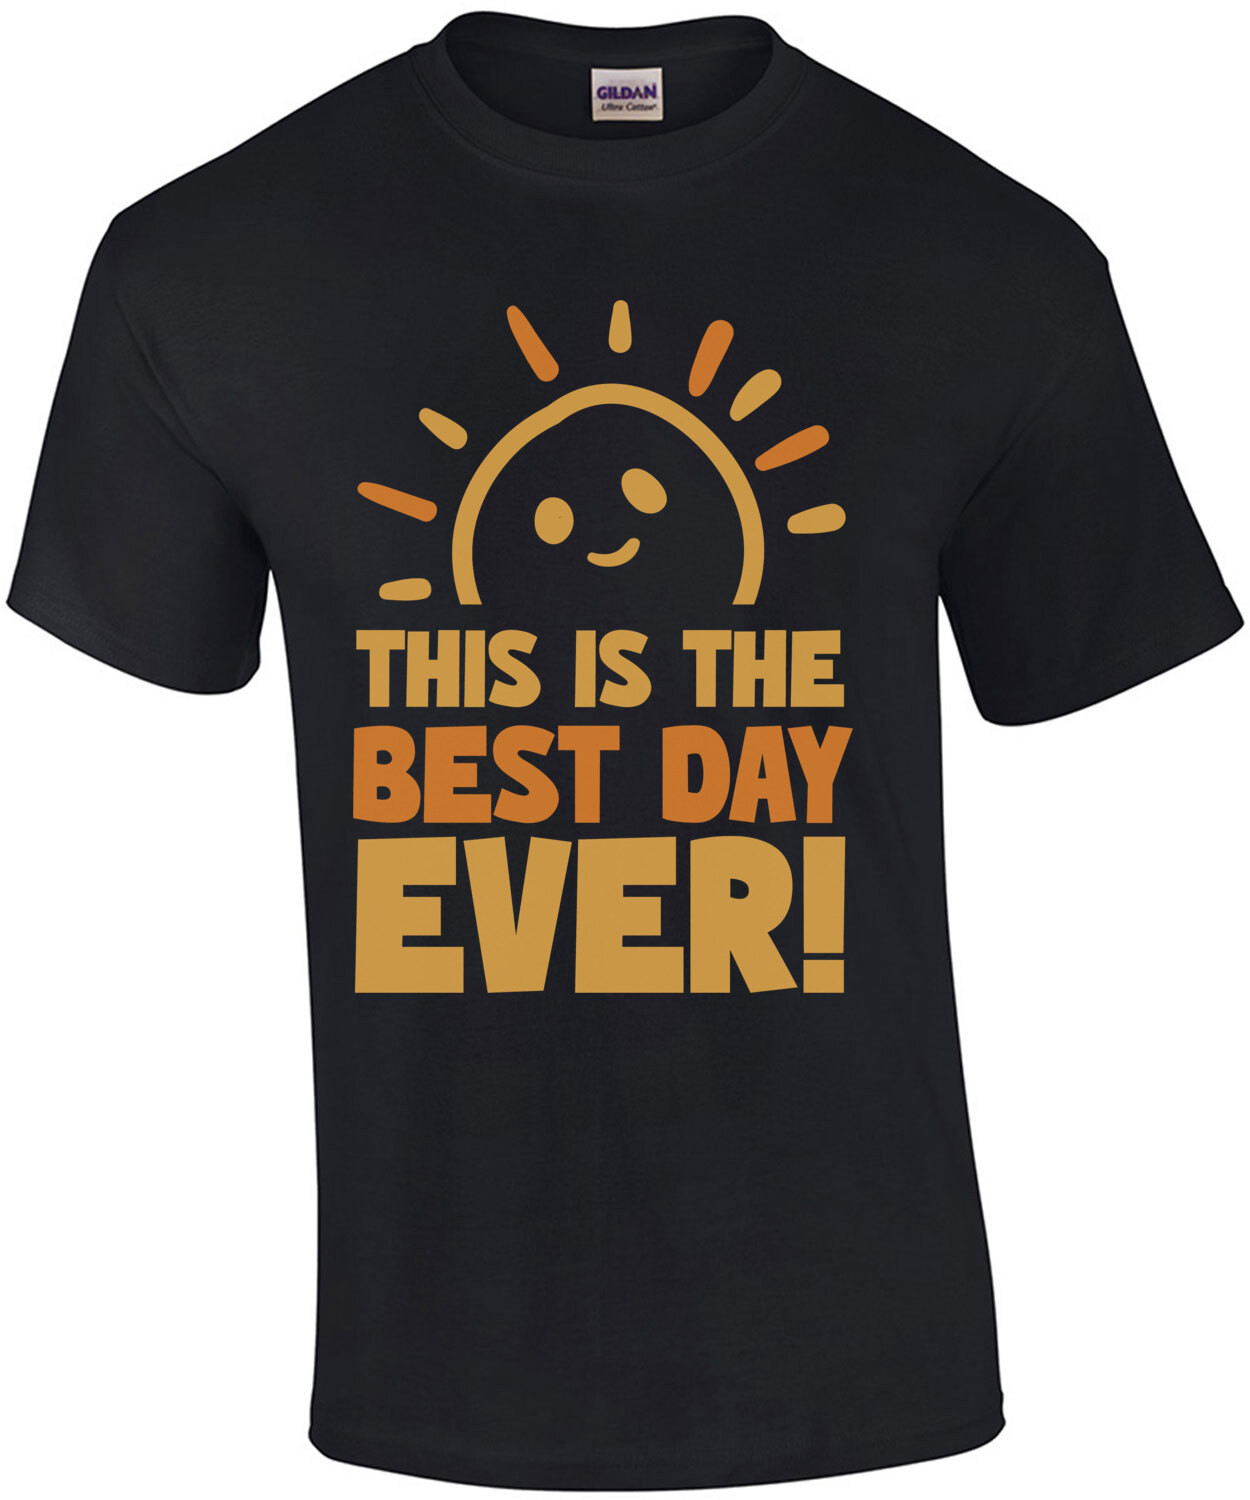 This is the best day ever! Funny retro vintage sarcastic T-Shirt